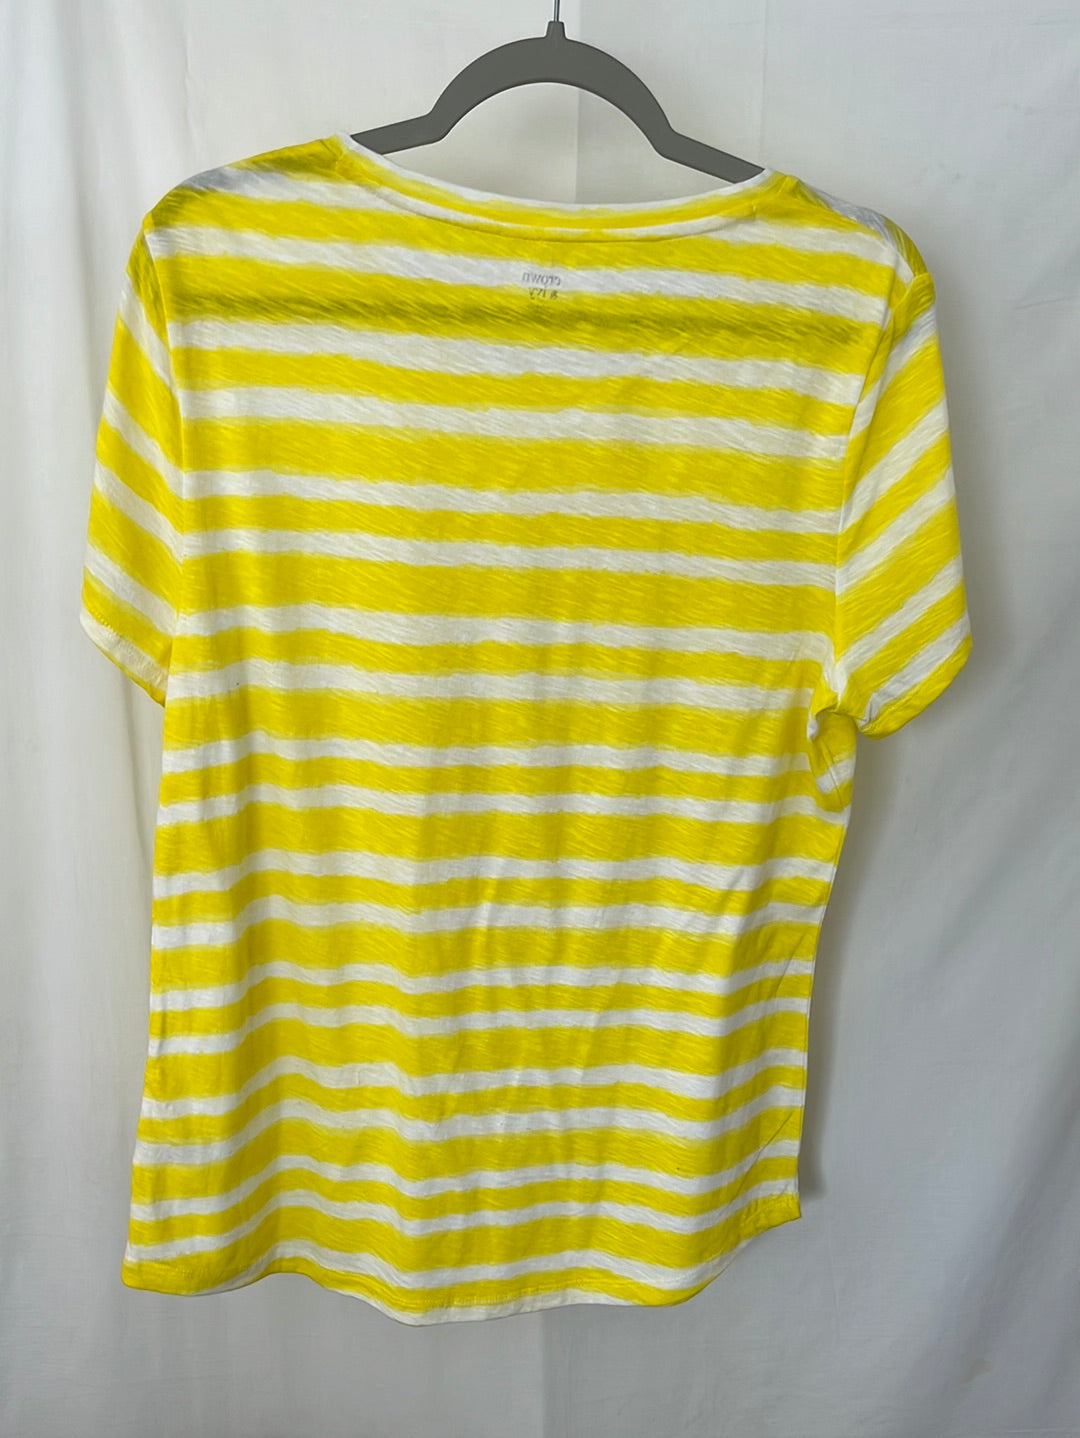 NWT -- Crown & Ivy Yellow and White Striped Short Sleeve Tee Shirt -- Size XL